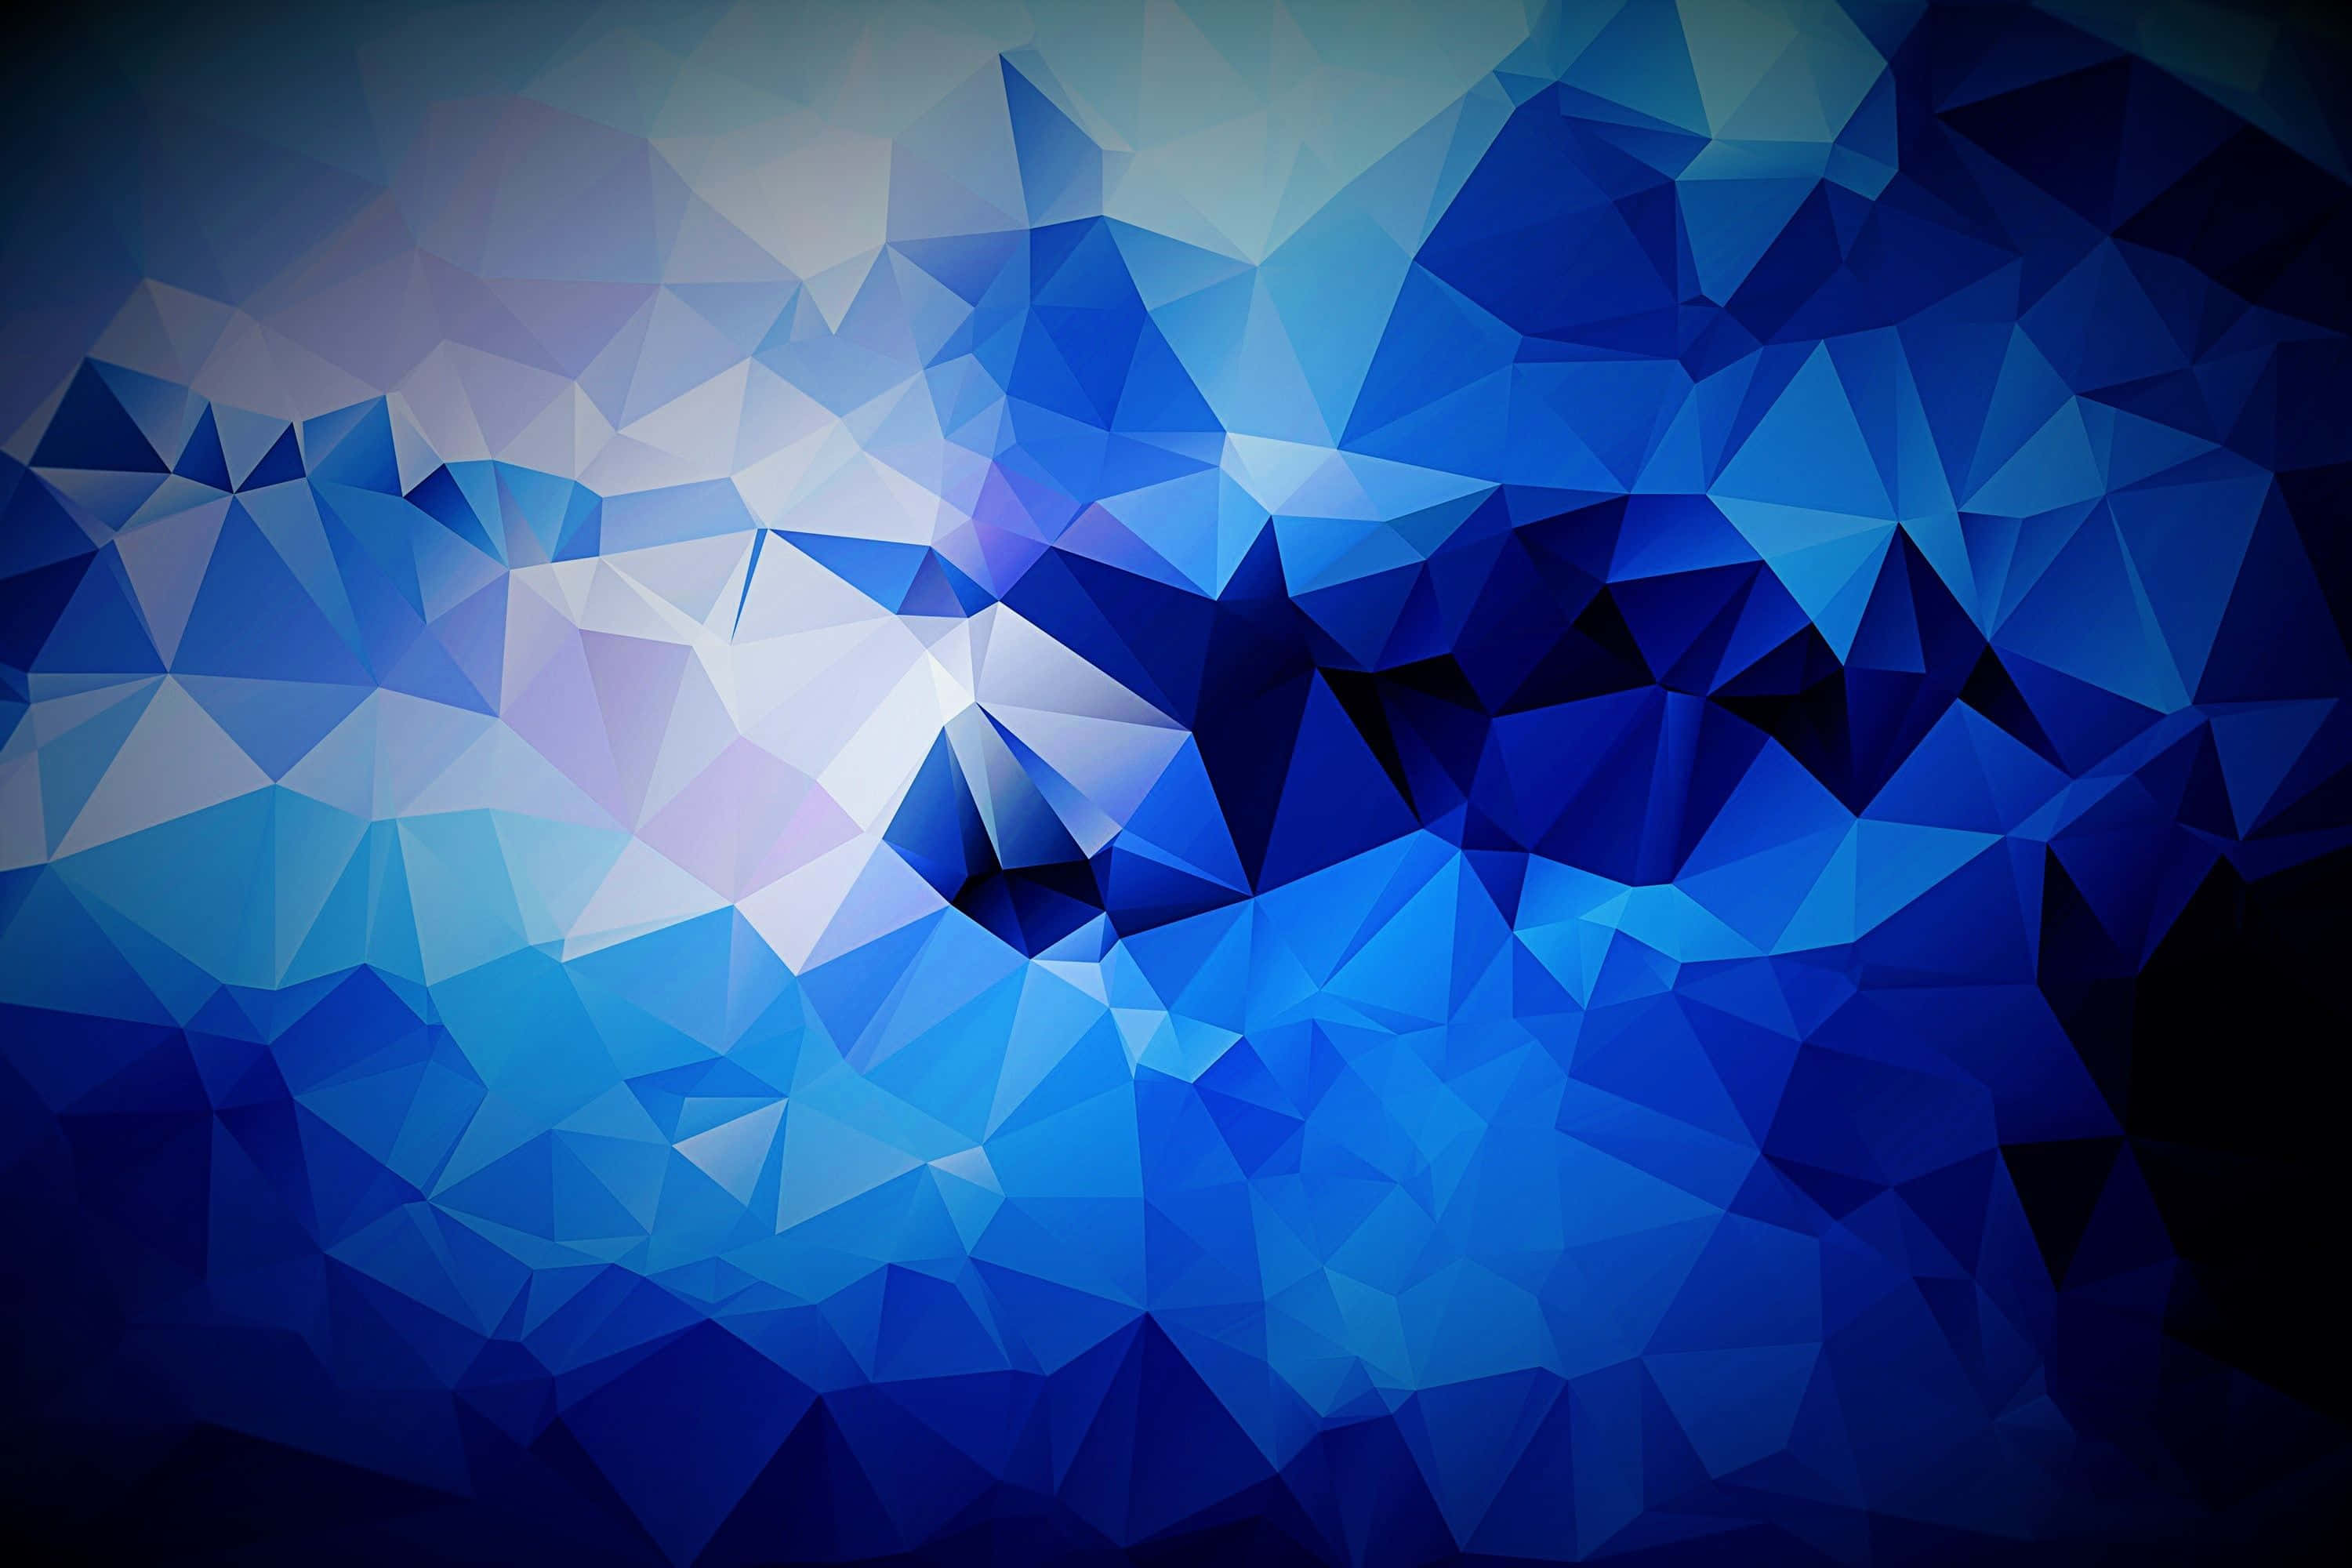 A vibrant blue abstract background with a kaleidoscopic pattern